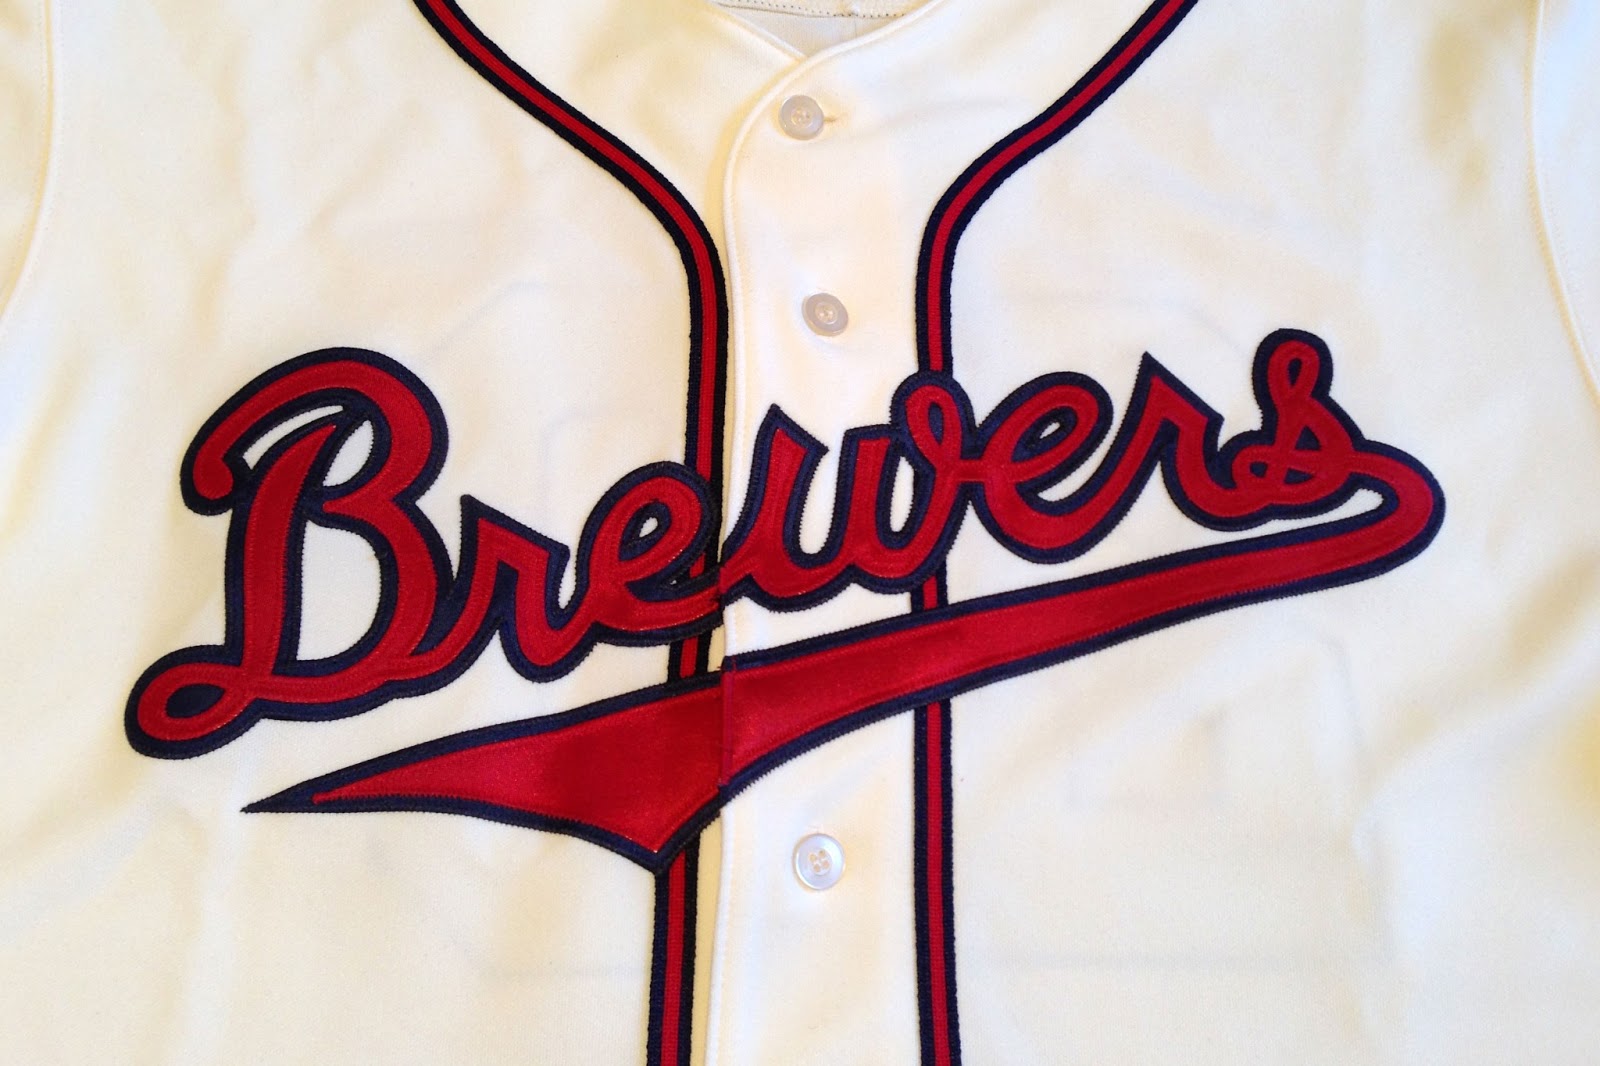 brewers throwback jersey